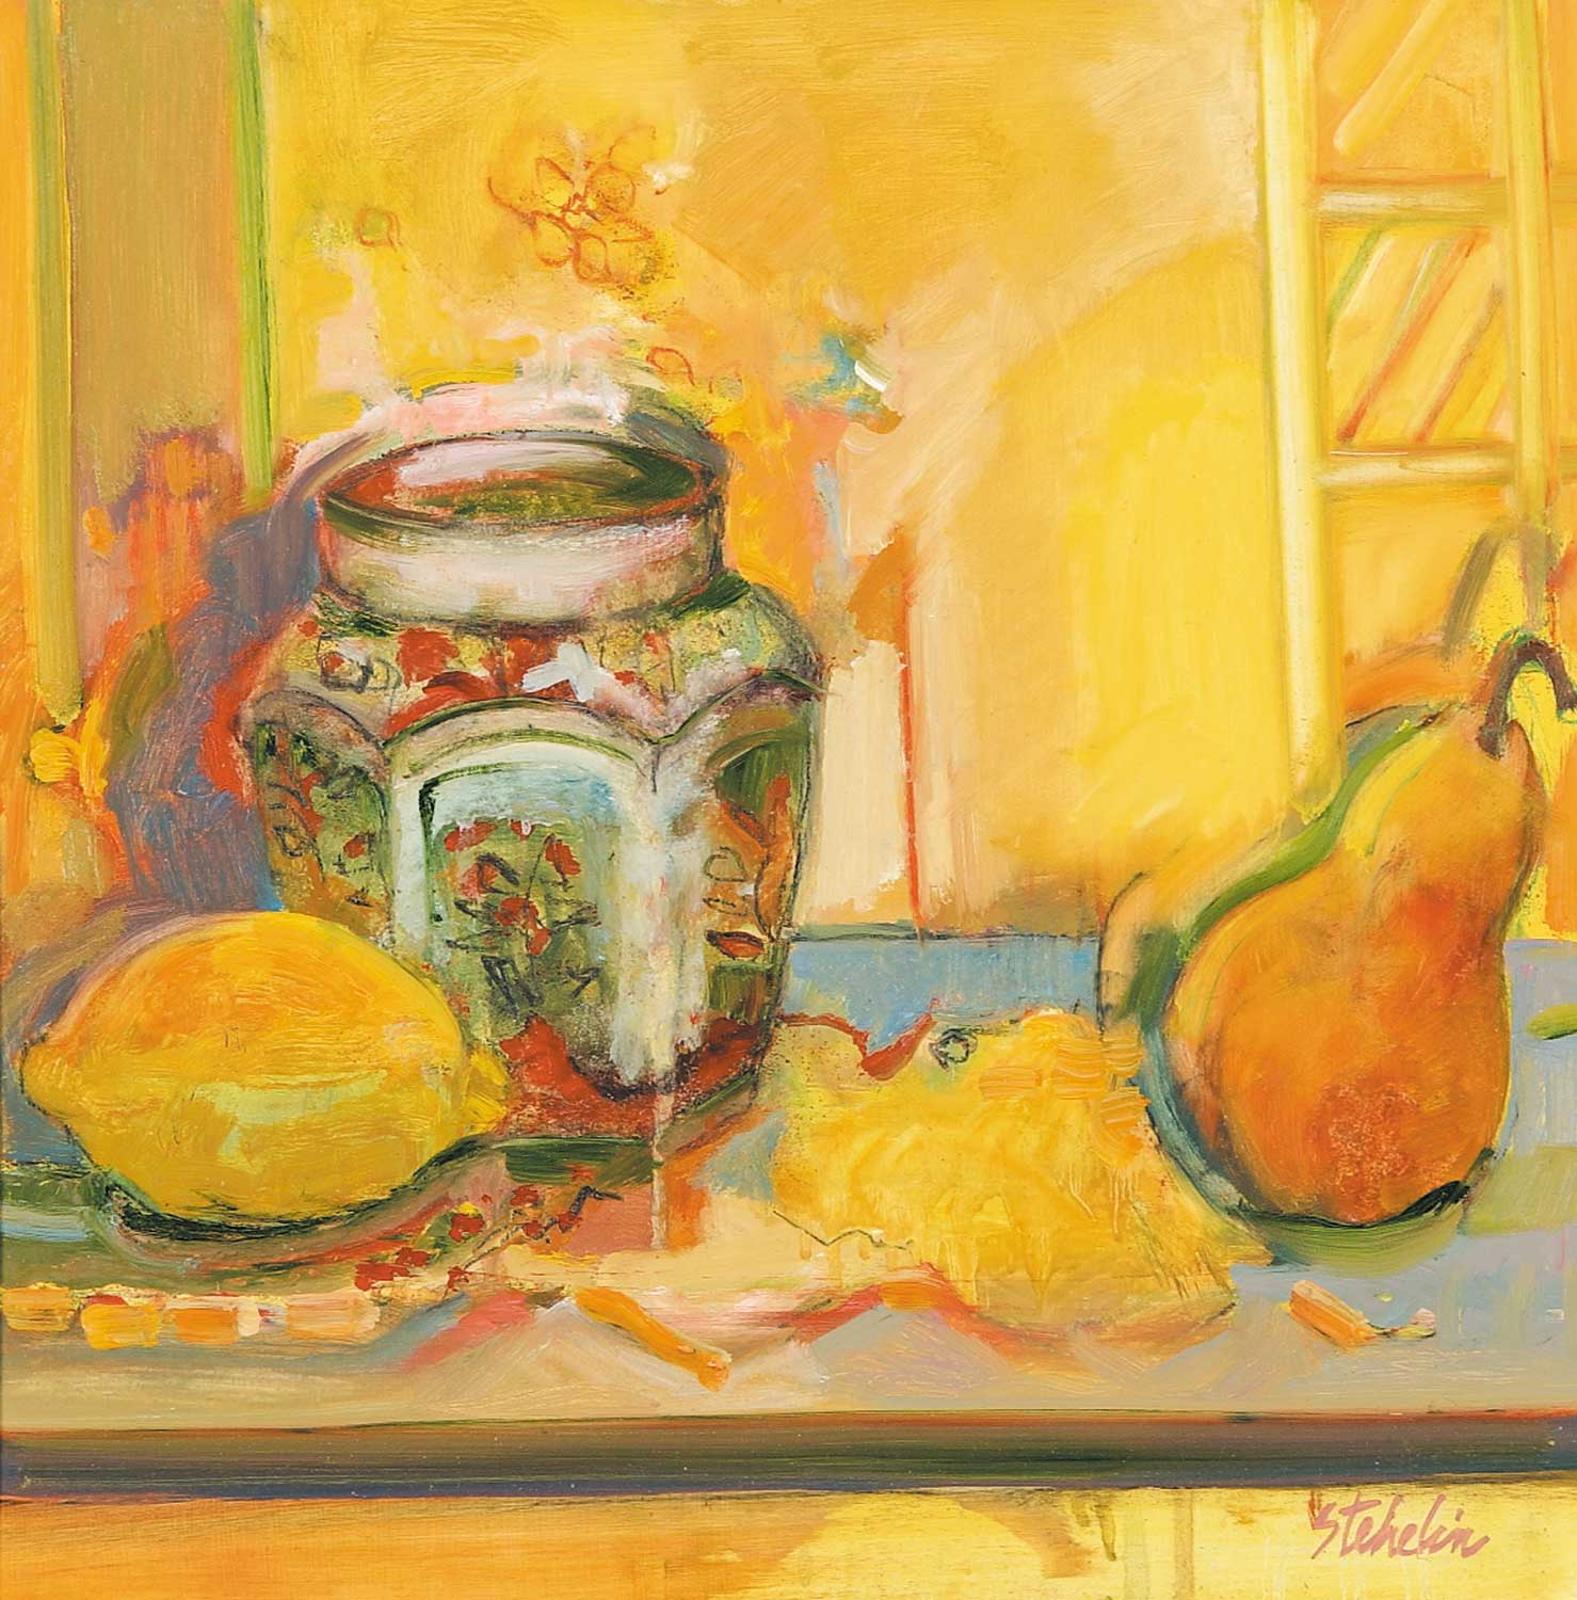 Jacqueline Stehelin - Untitled - Ginger Jar and Pear